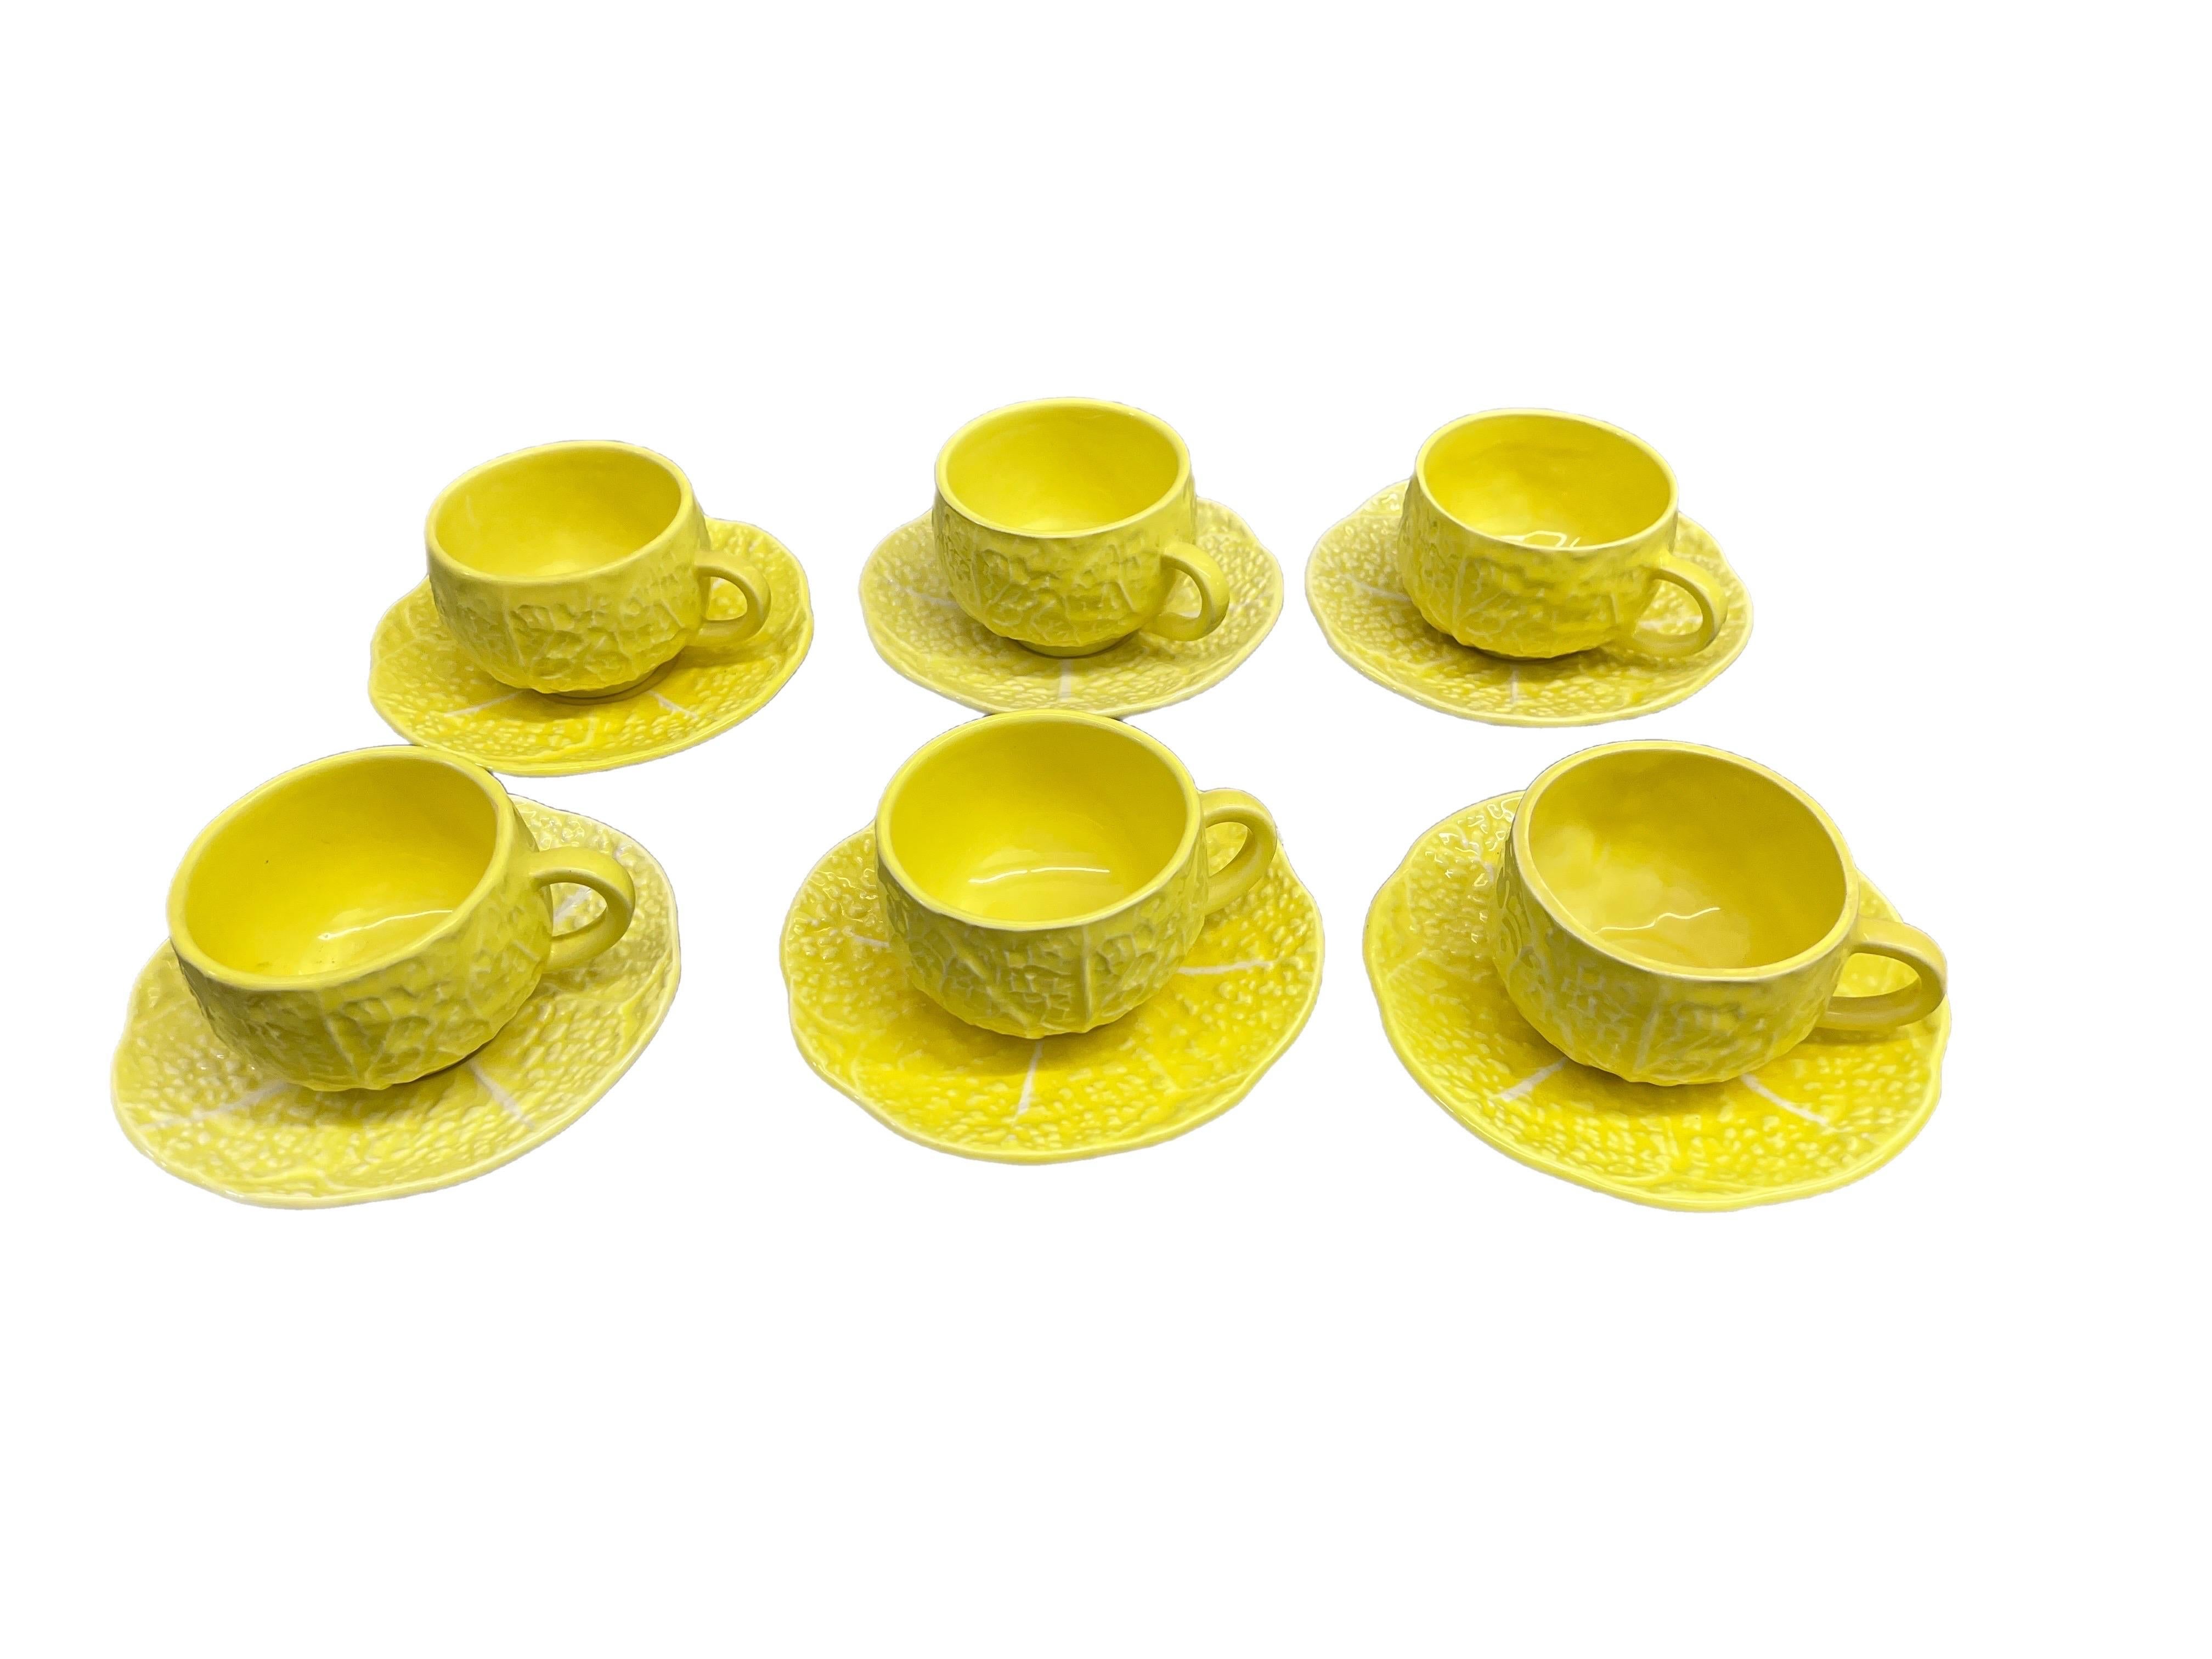 This set of 21 pieces of Secla yellow cabbage ware includes 6 cups with 6 saucers, 6 salad or dessert plates, and 3 soup cups. circa Mid-20th Century.
Dinner plates measure: 8.75” x .1”tall
Saucer plates measure: 6.25” x .1”
Cups measure : 5” x